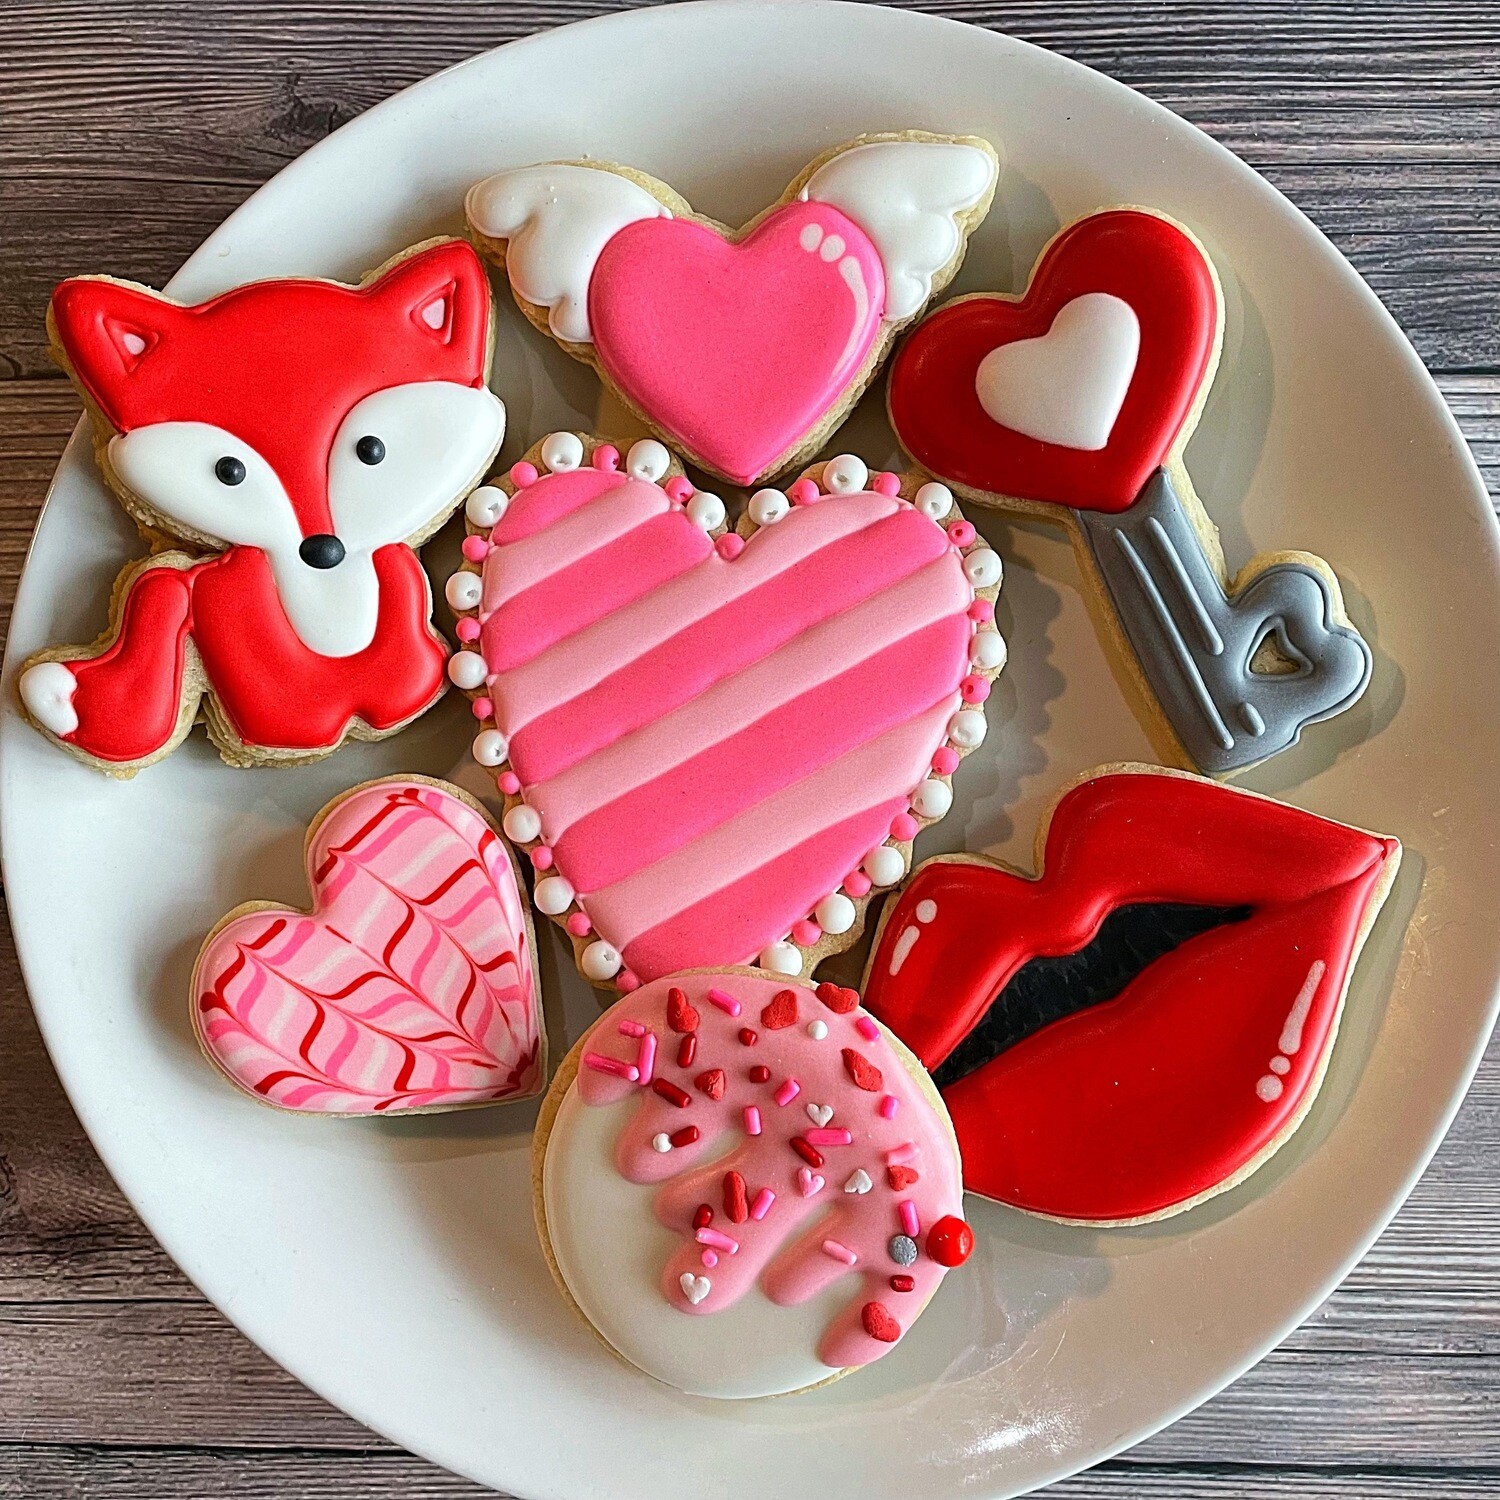 FOXY LOVE Decorating Workshop - SUNDAY, FEB 5th at 4 p.m. (WHITEHOUSE)